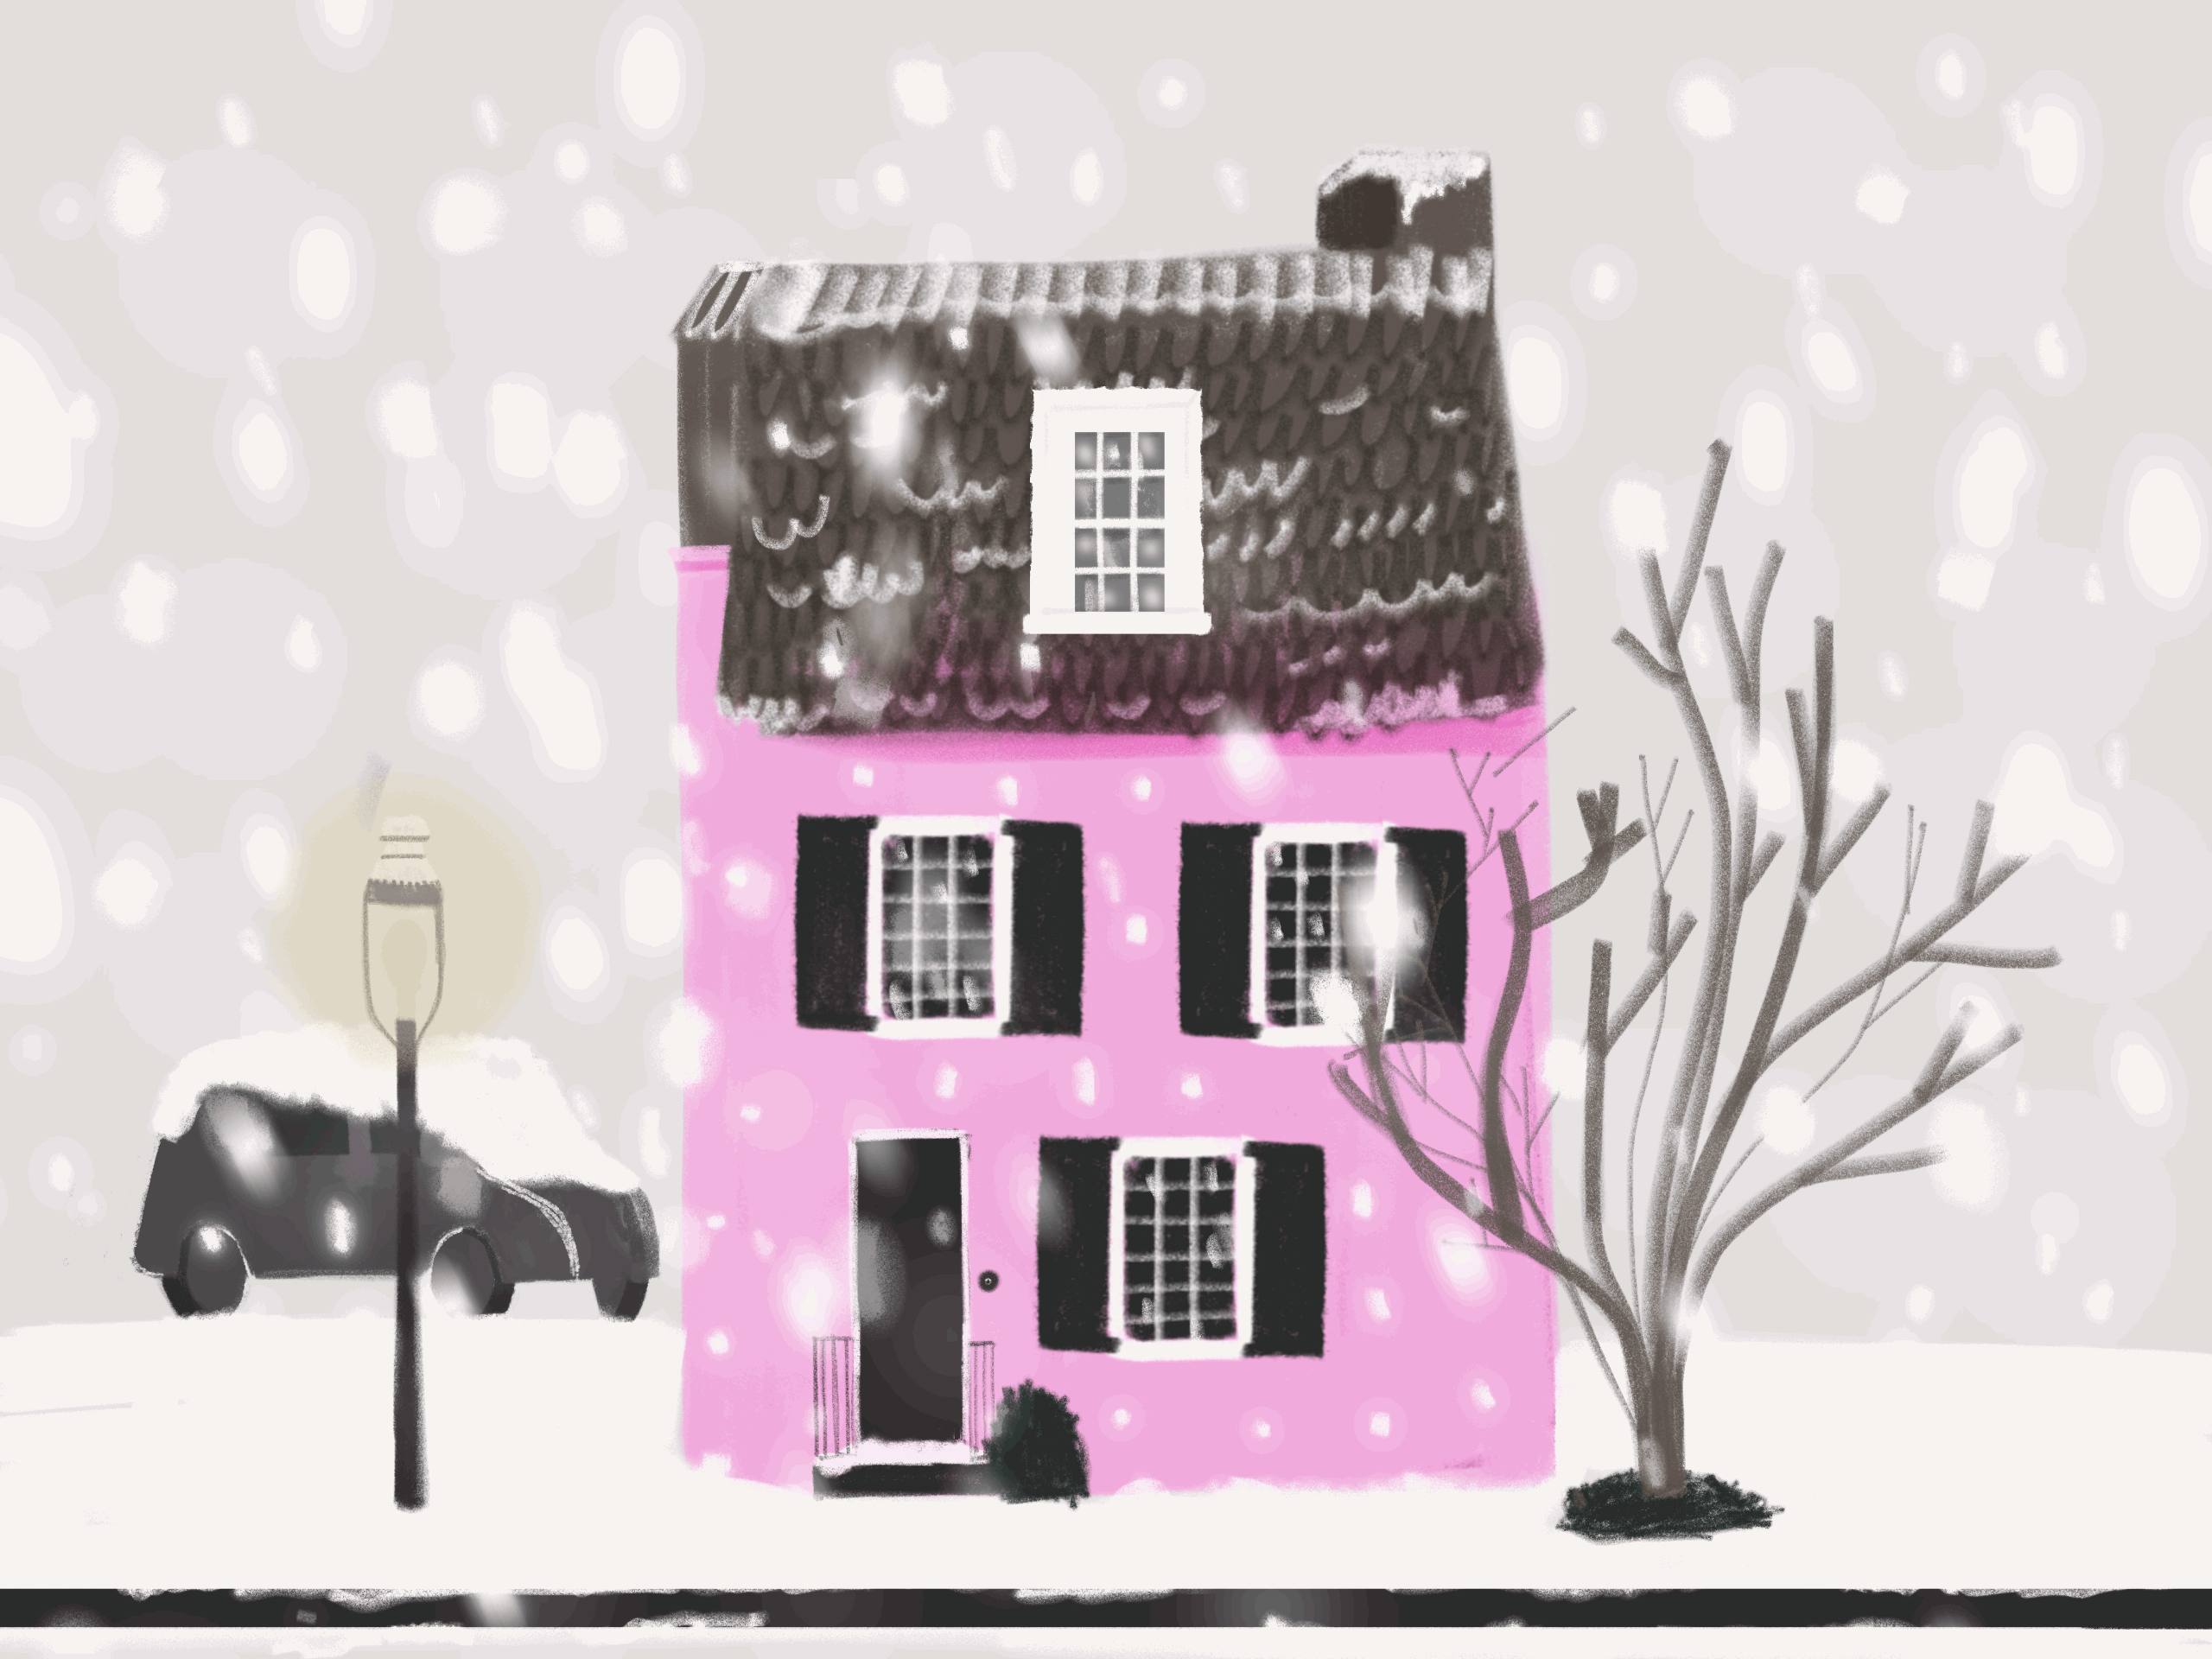 Early snow animation brush childrens book childrens illustration gif house illustration pink procreate snow